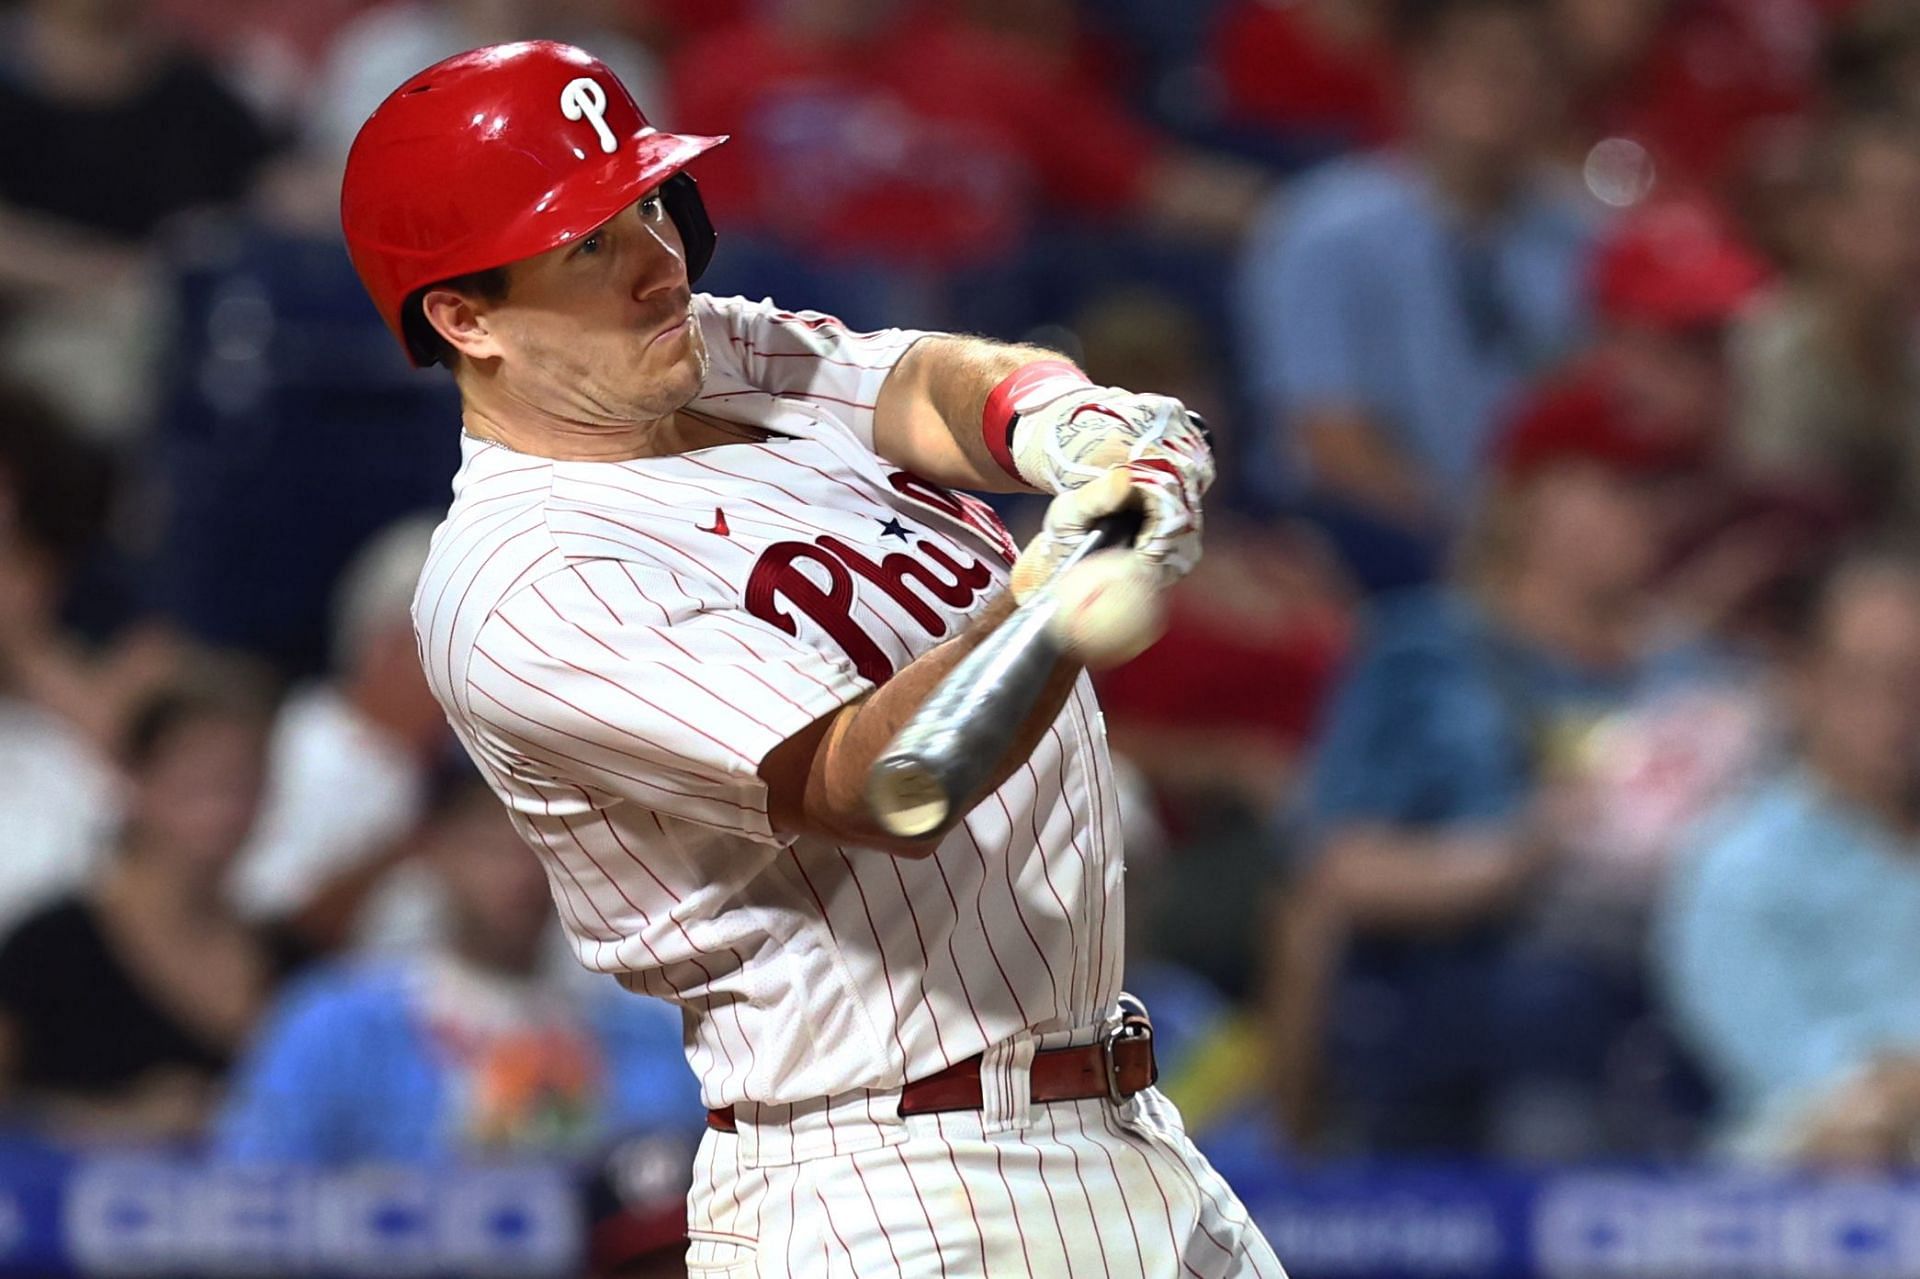 Phillies' J.T. Realmuto clarifies vaccine comments, looks to 'turn